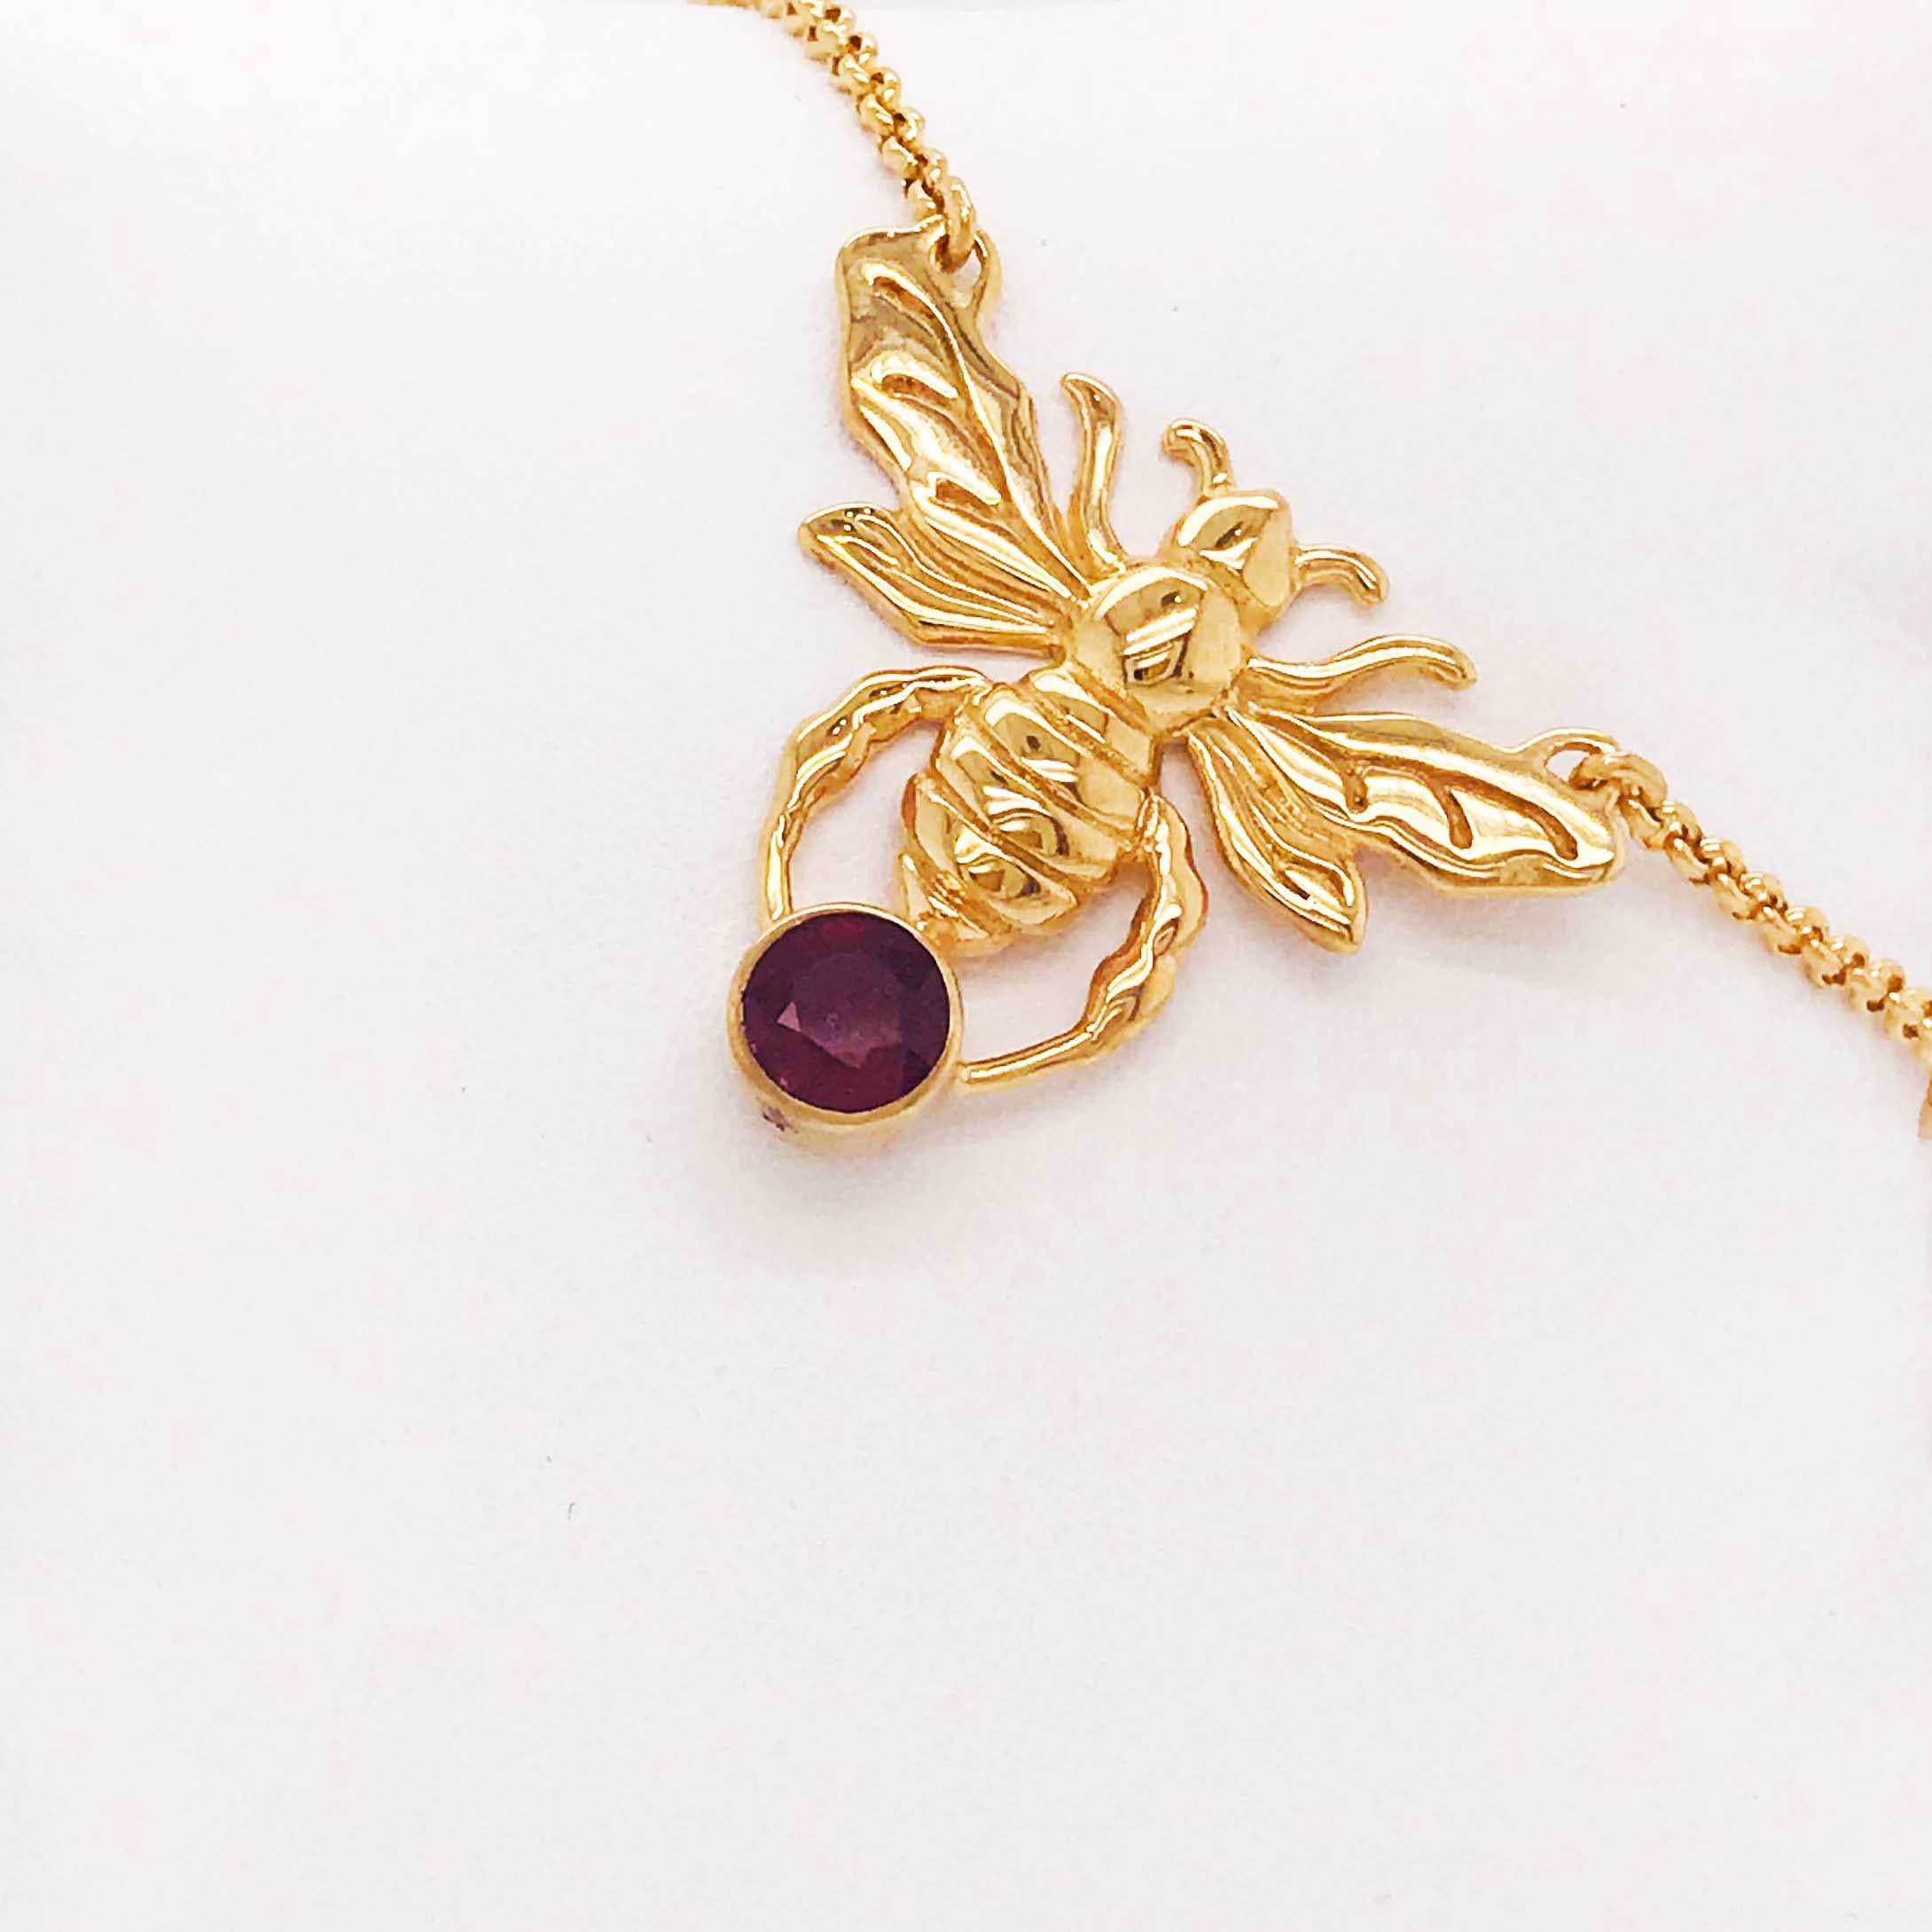 Aesthetic Movement 1/2 Carat '0.50 ct' Ruby Gemstone Large Gold Bee Pendant Necklace, Bee Necklace